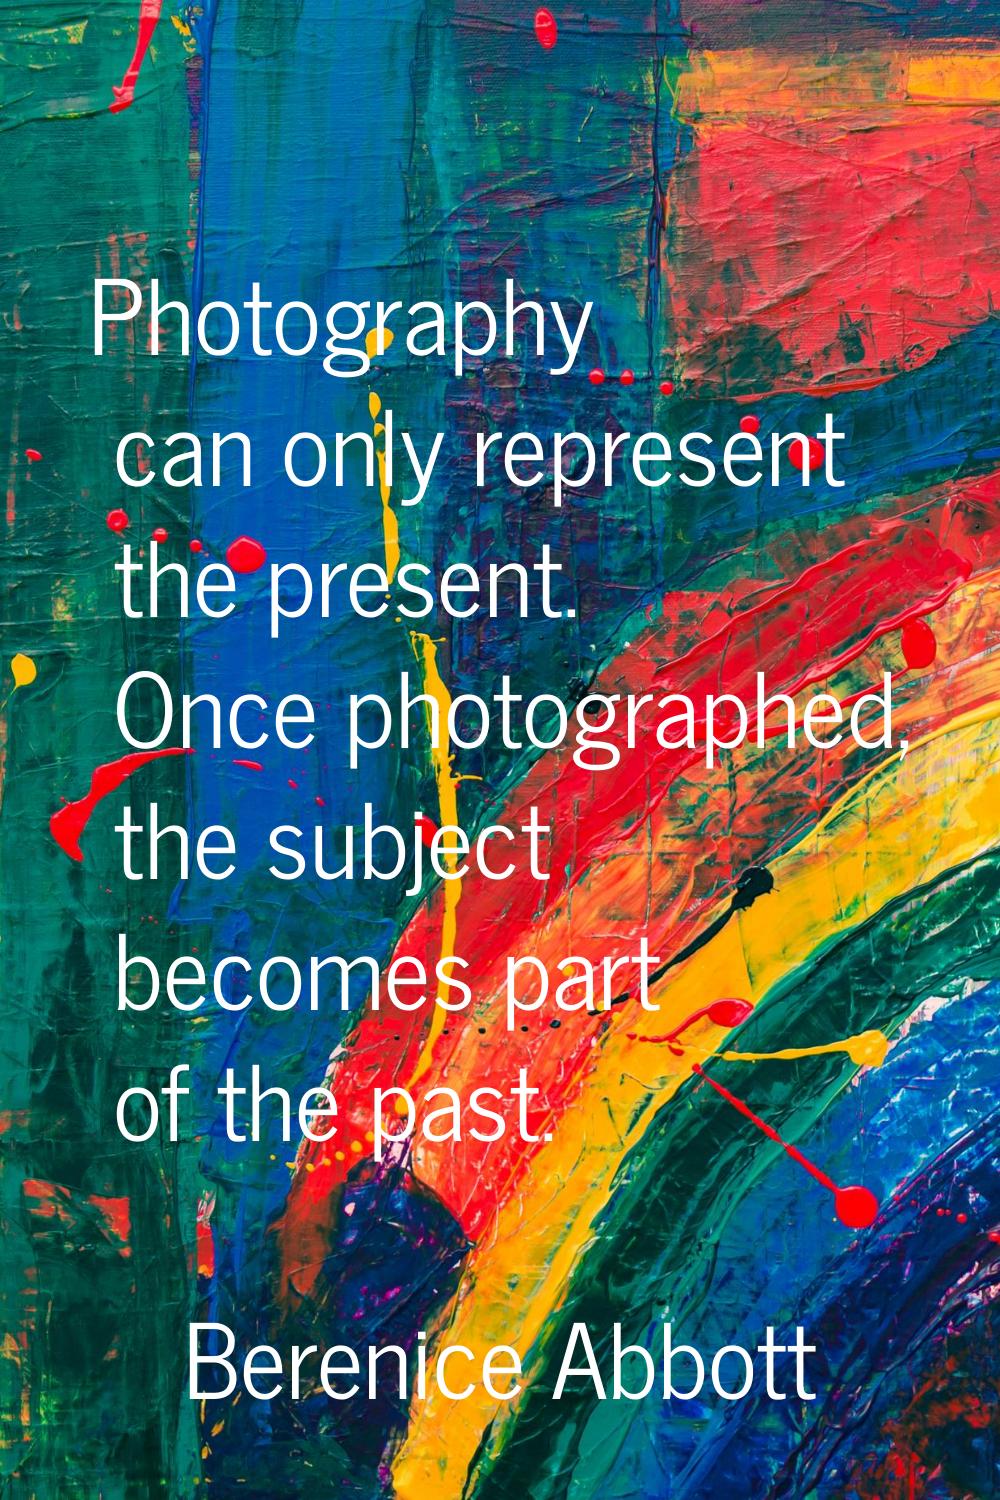 Photography can only represent the present. Once photographed, the subject becomes part of the past